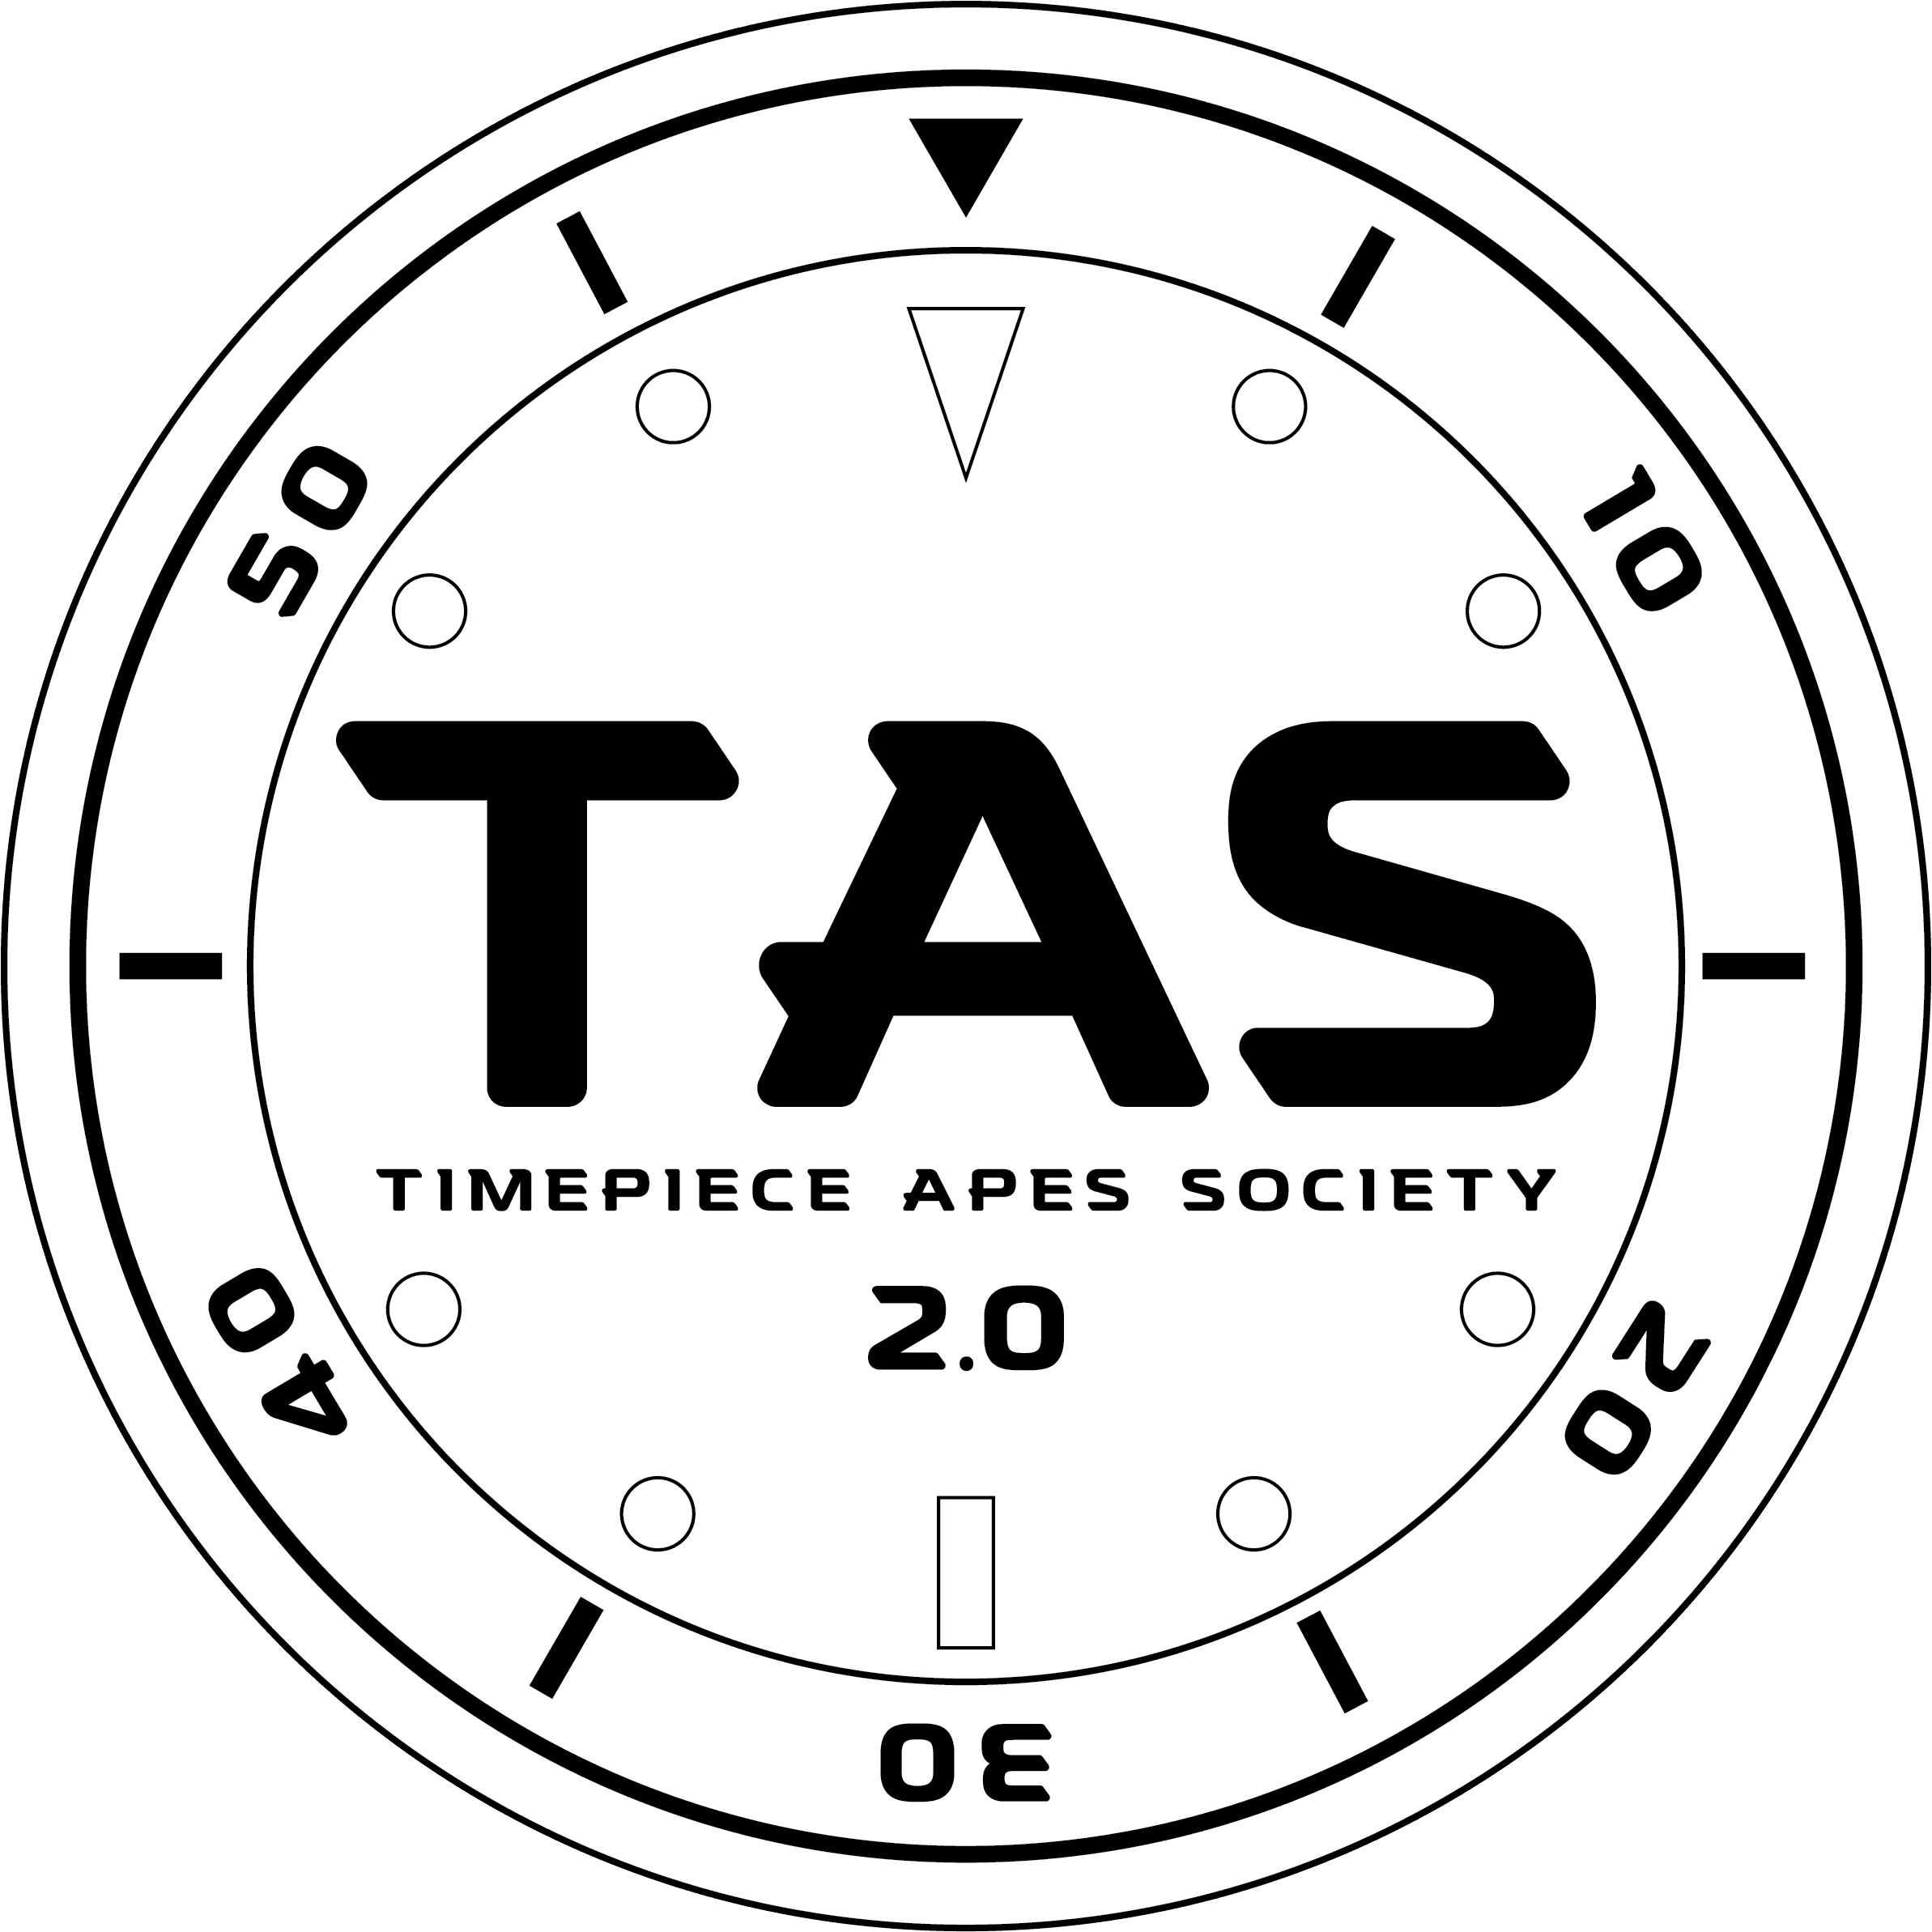 Timepiece Apes Society (TAS 2.0) - STAKING IS LIVE !!!